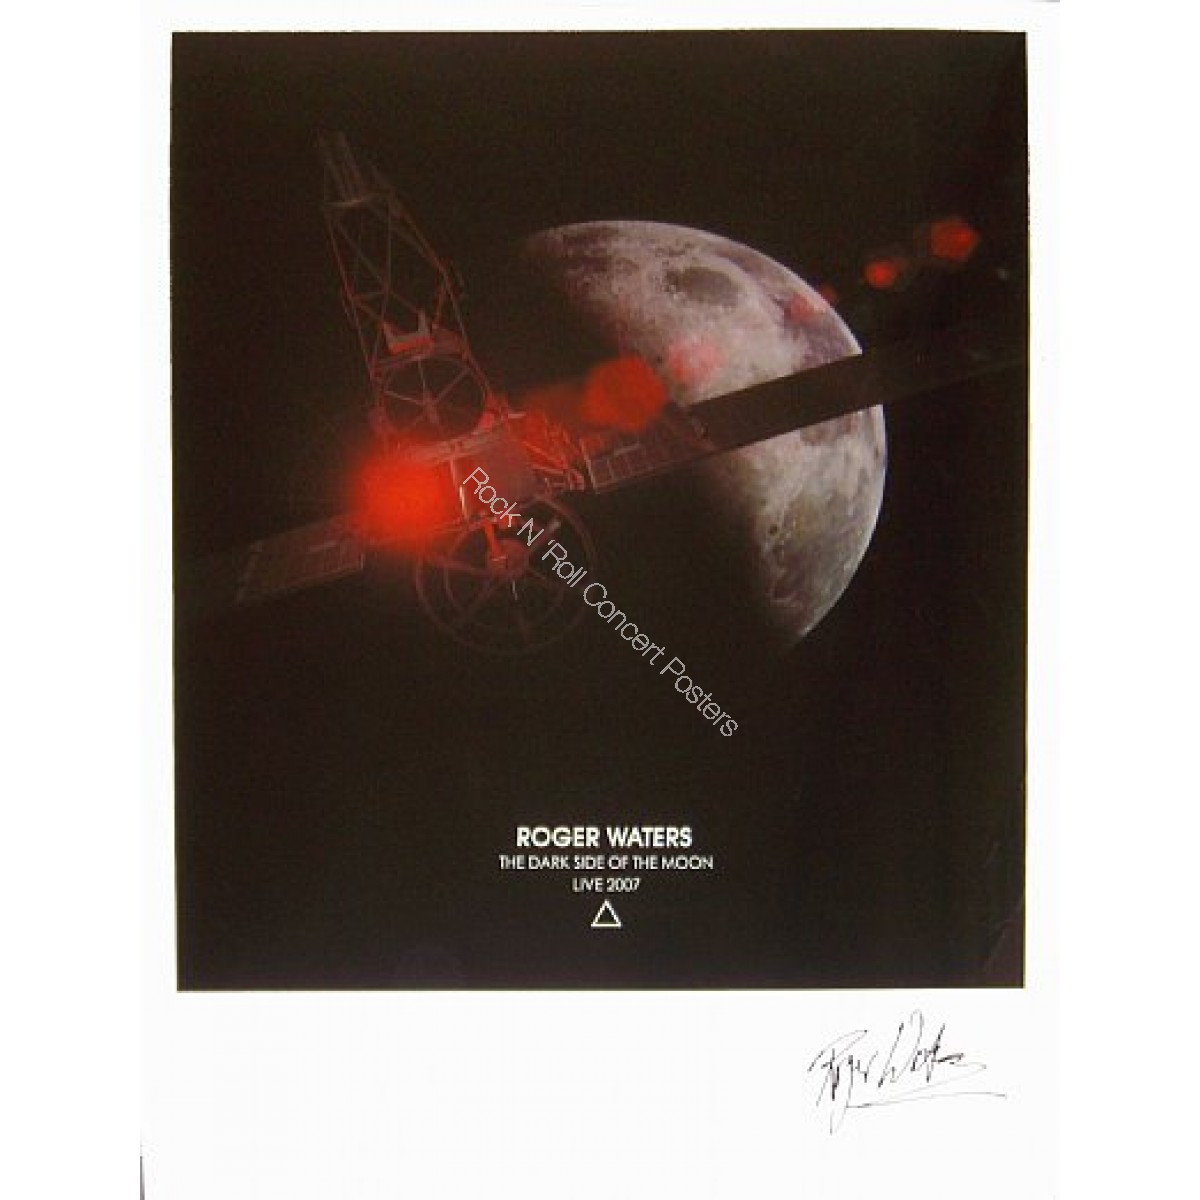 Roger Waters World Tour 2007 "Dark Side Of The Moon" Hand numbered lithograph